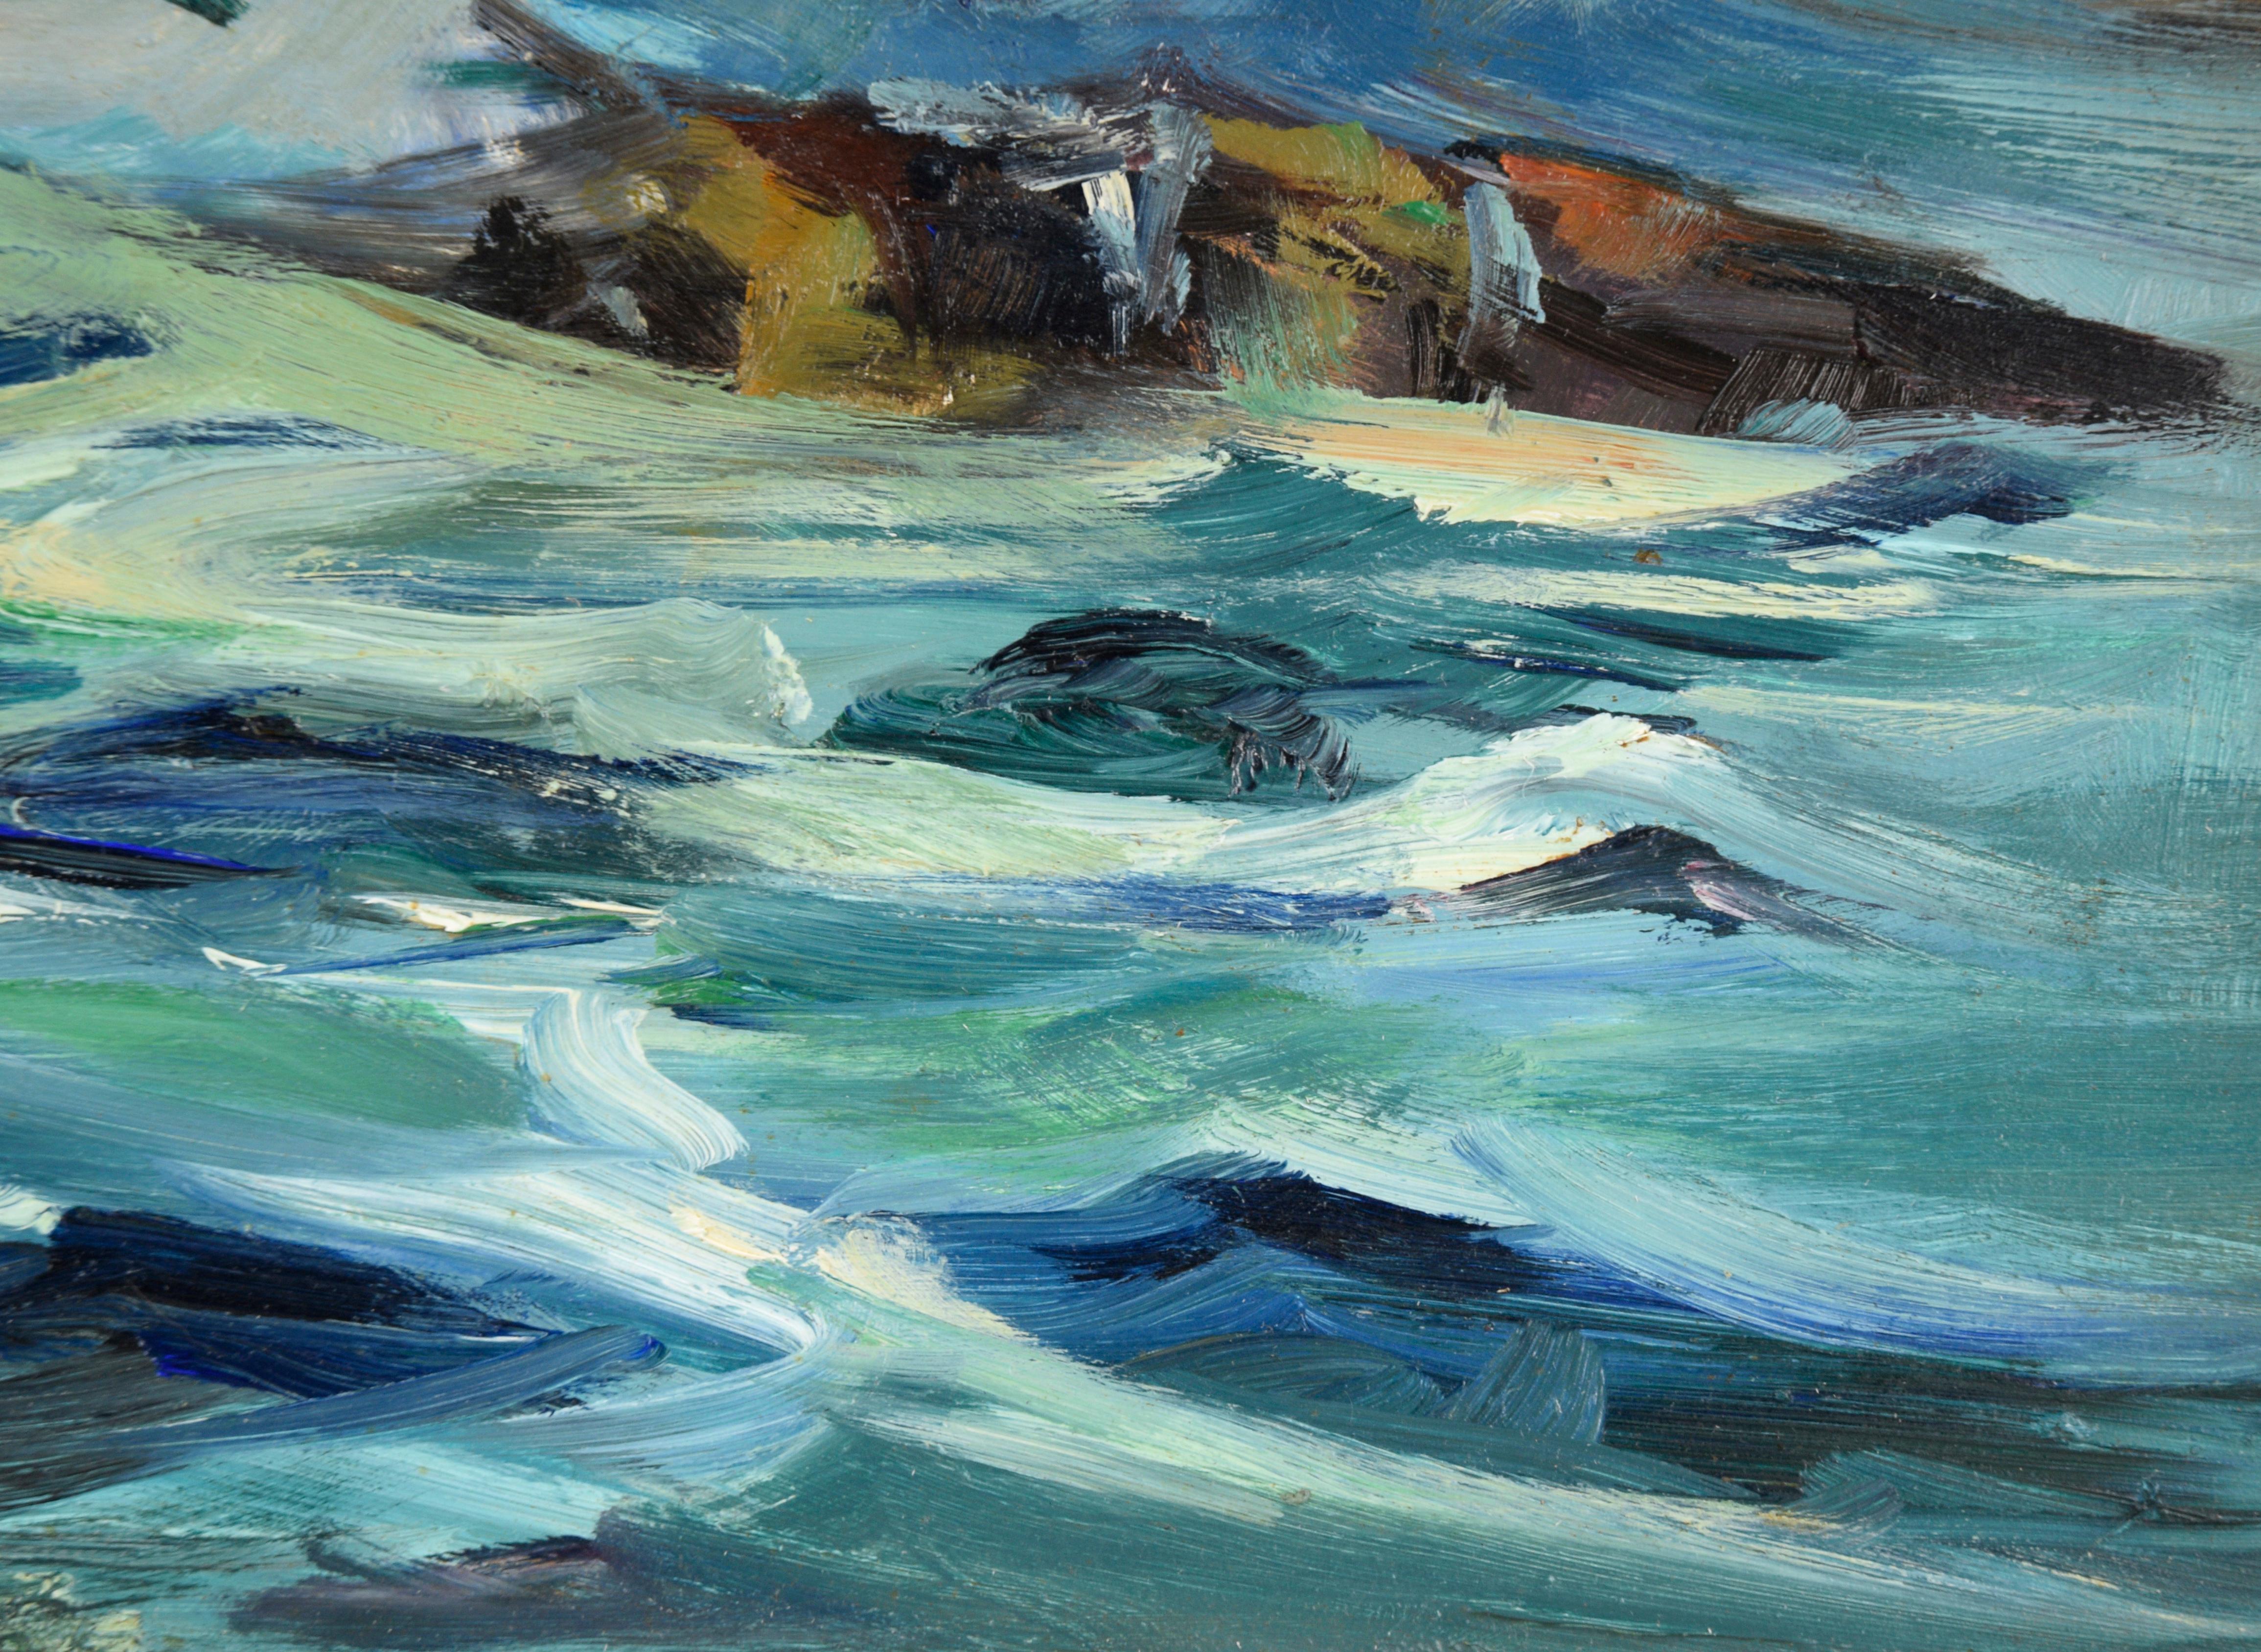 Seagull Flying Above Crashing Waves, Mid Century California Seascape - American Impressionist Painting by Joseph Frey